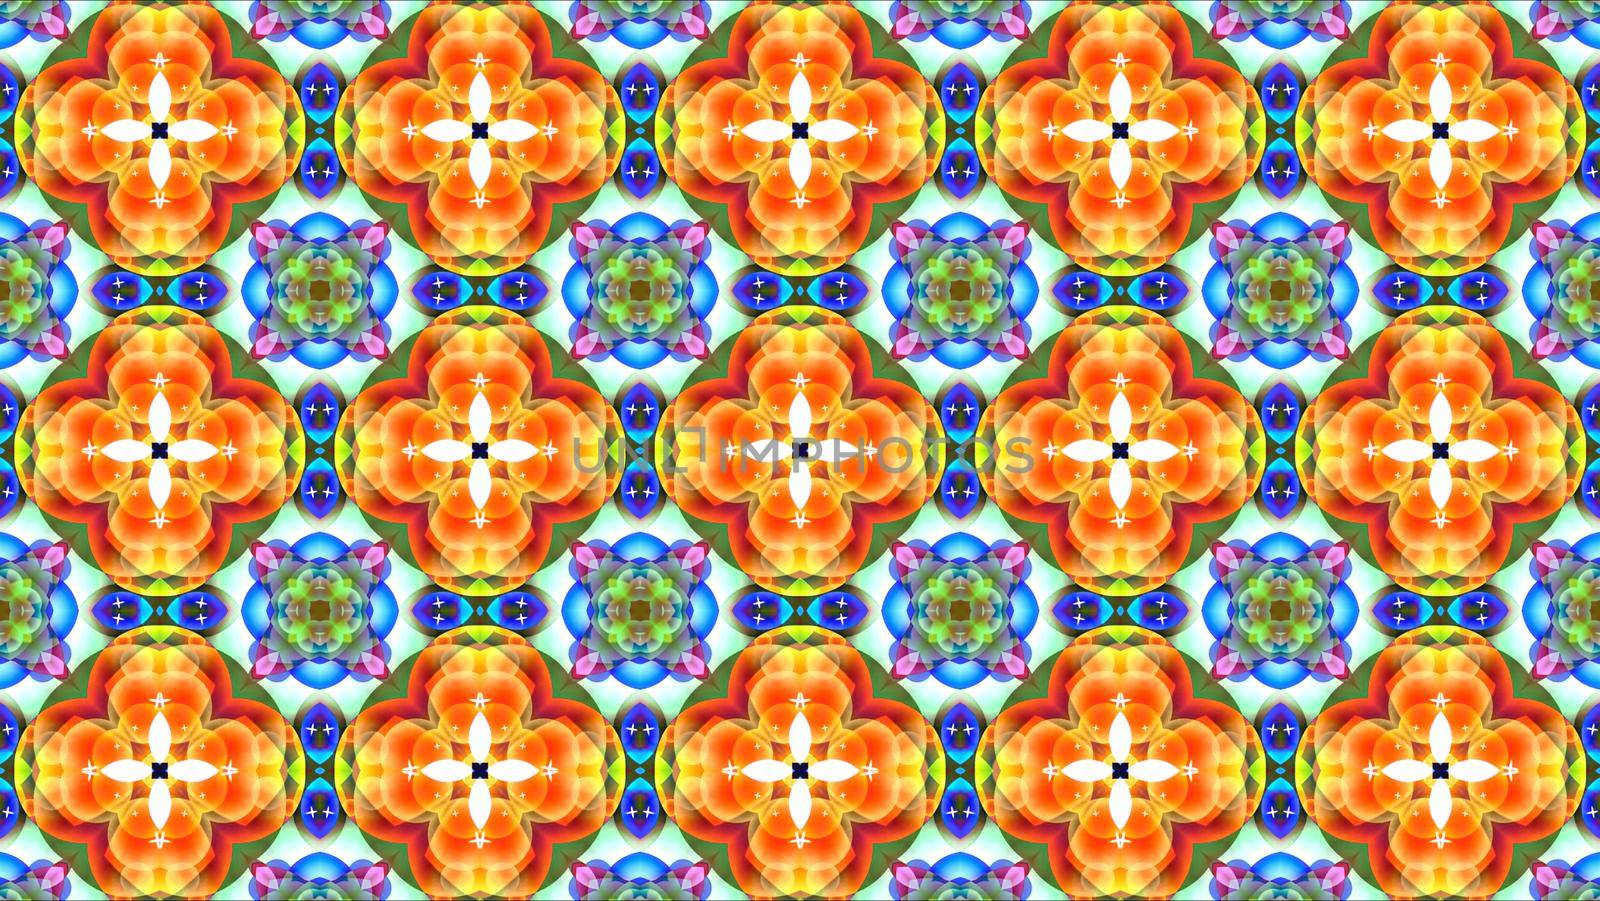 triple red yellow giant flower cross blue pollen with white stars and green flower kaleidoscope reflection texture pattern background